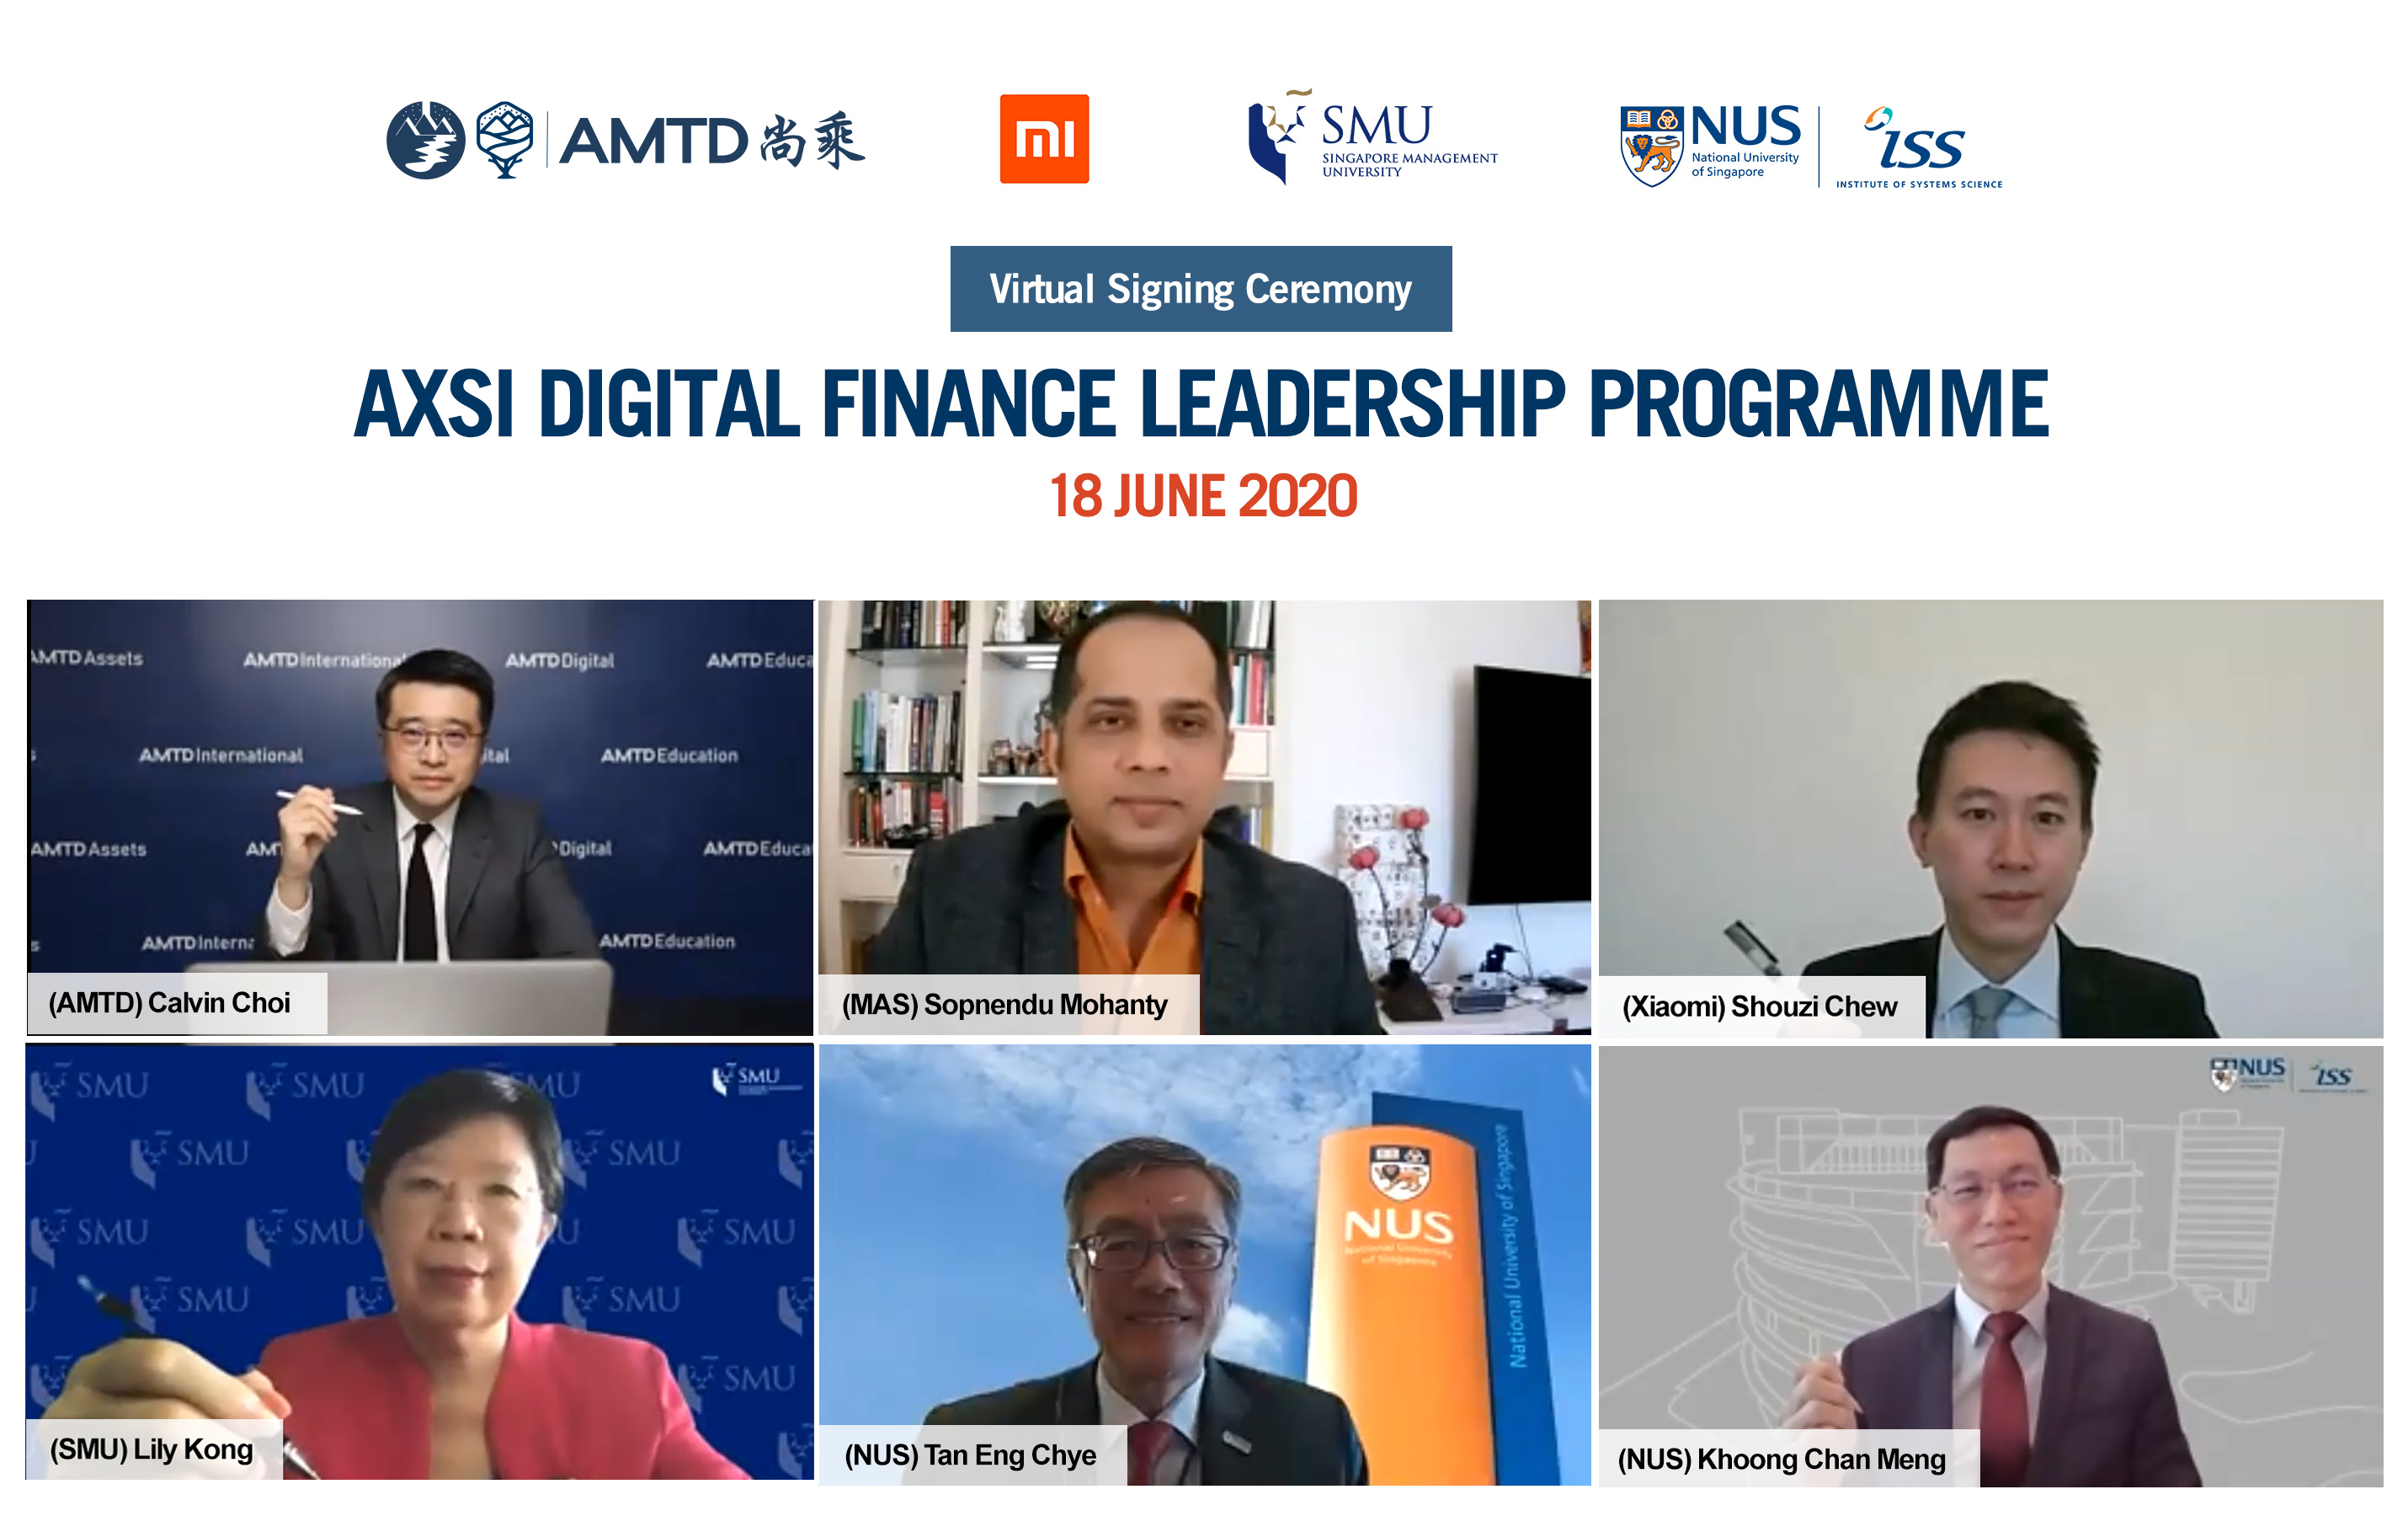 AMTD, Xiaomi Finance, SMU and ISS launch pivotal programme to empower digital finance leaders